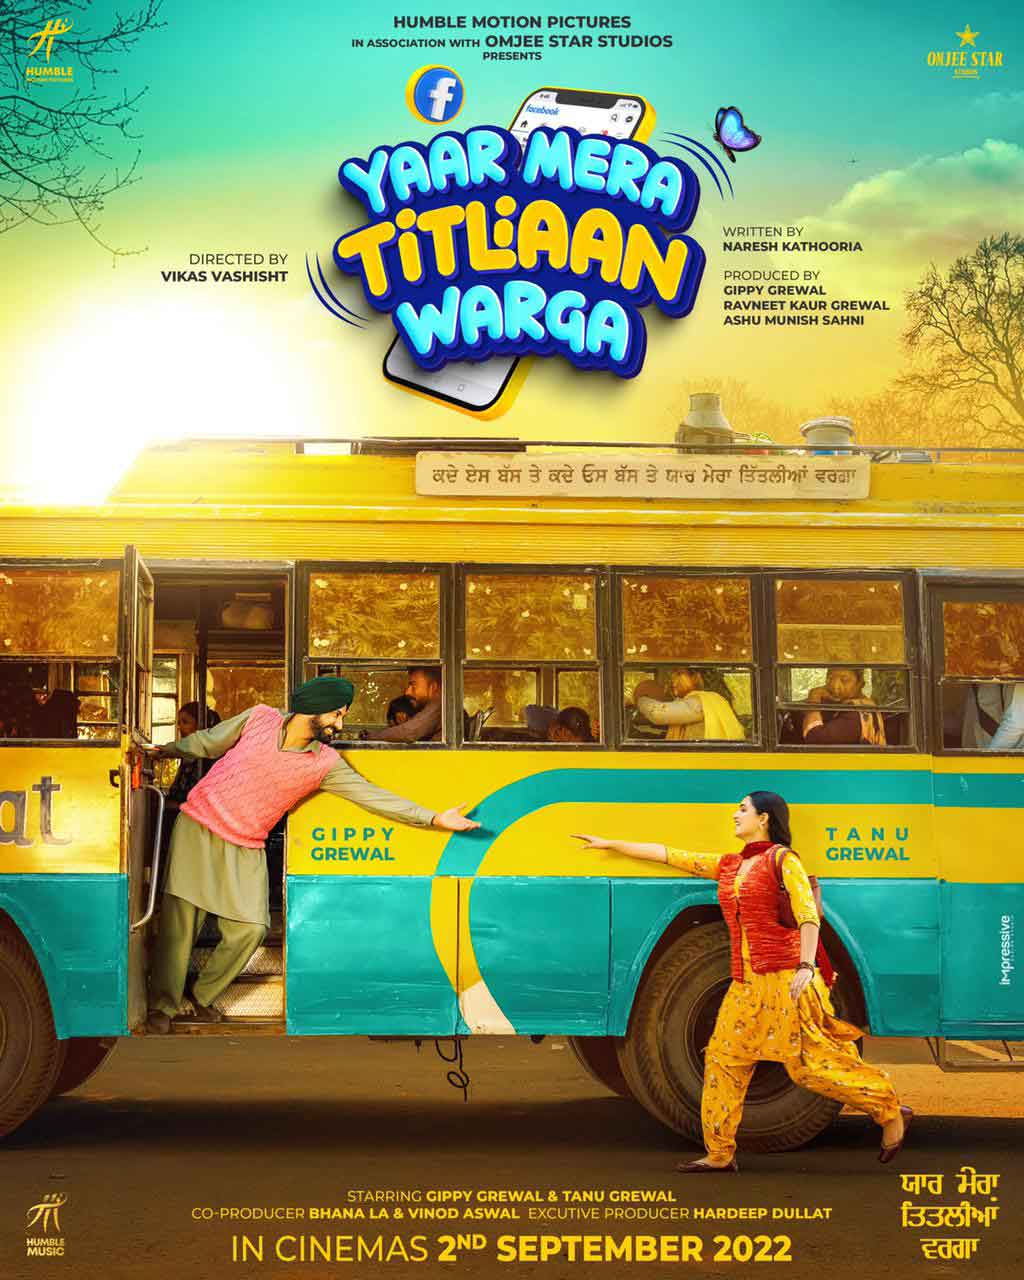 Gippy Grewal, the superstar of Punjabi cinema, shares the second poster for his forthcoming film, 'Yaar Mera Titliaan Warga